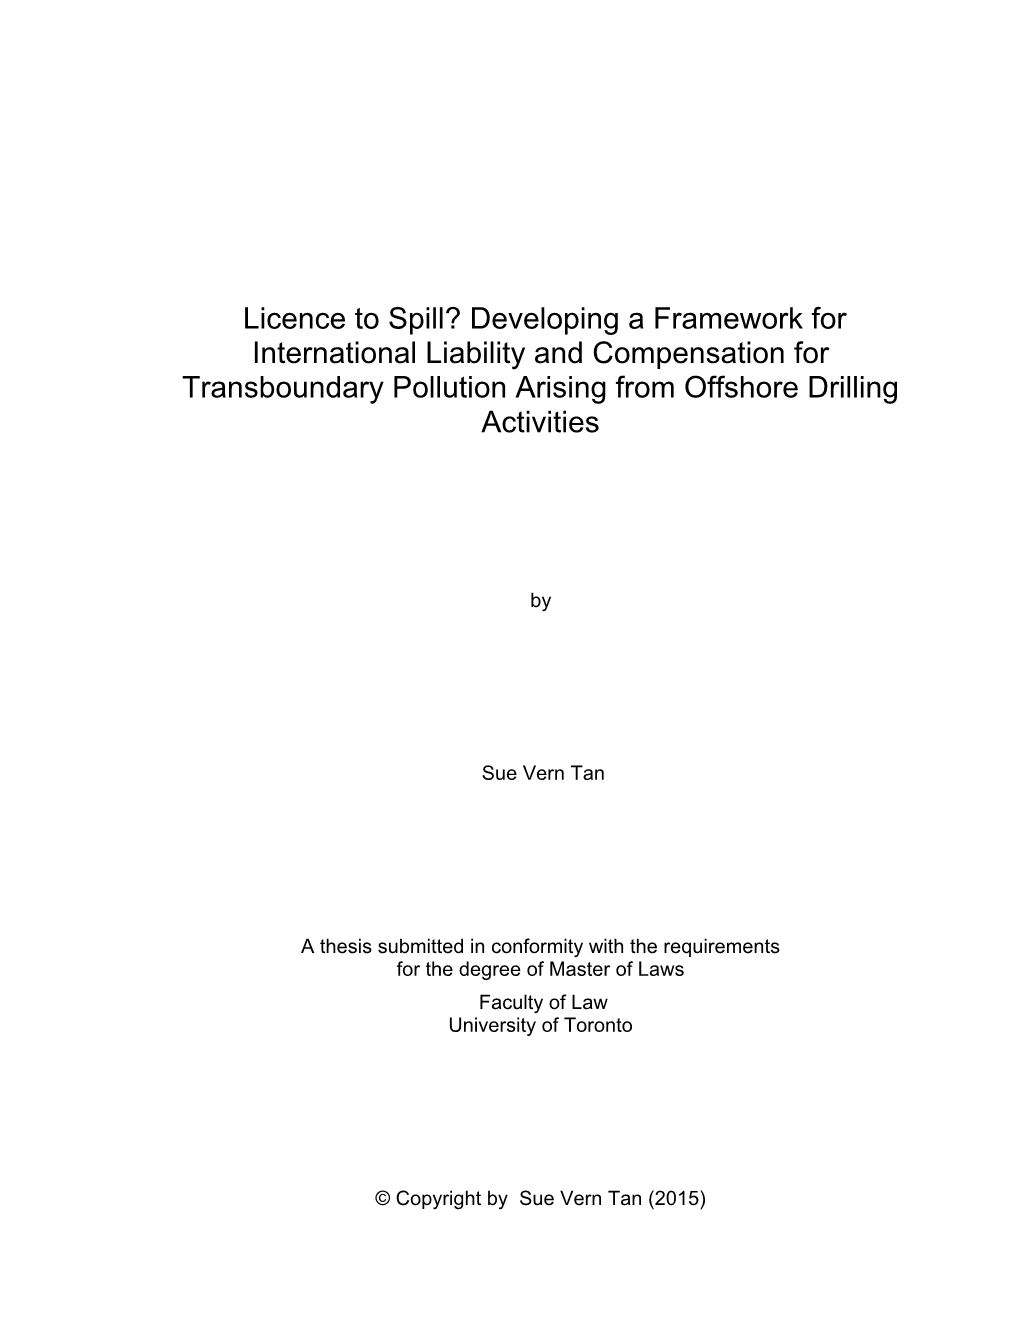 Licence to Spill? Developing a Framework for International Liability and Compensation for Transboundary Pollution Arising from Offshore Drilling Activities